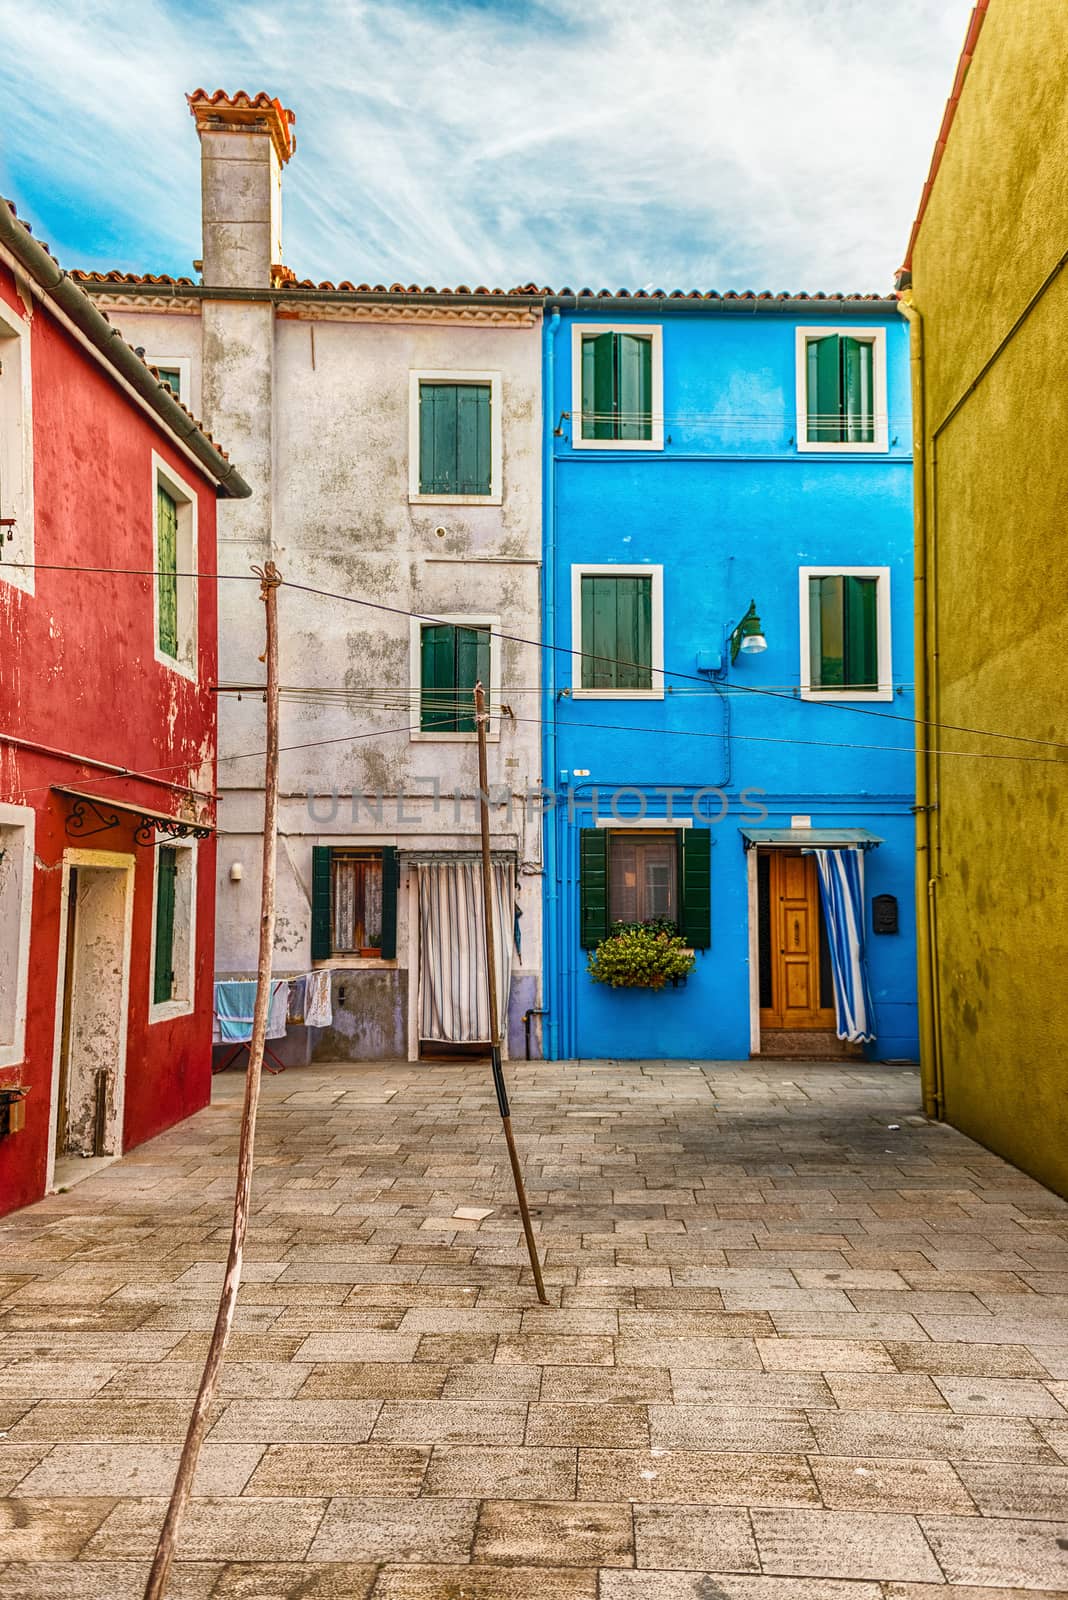 Colorful painted houses on the island of Burano, Venice, Italy by marcorubino